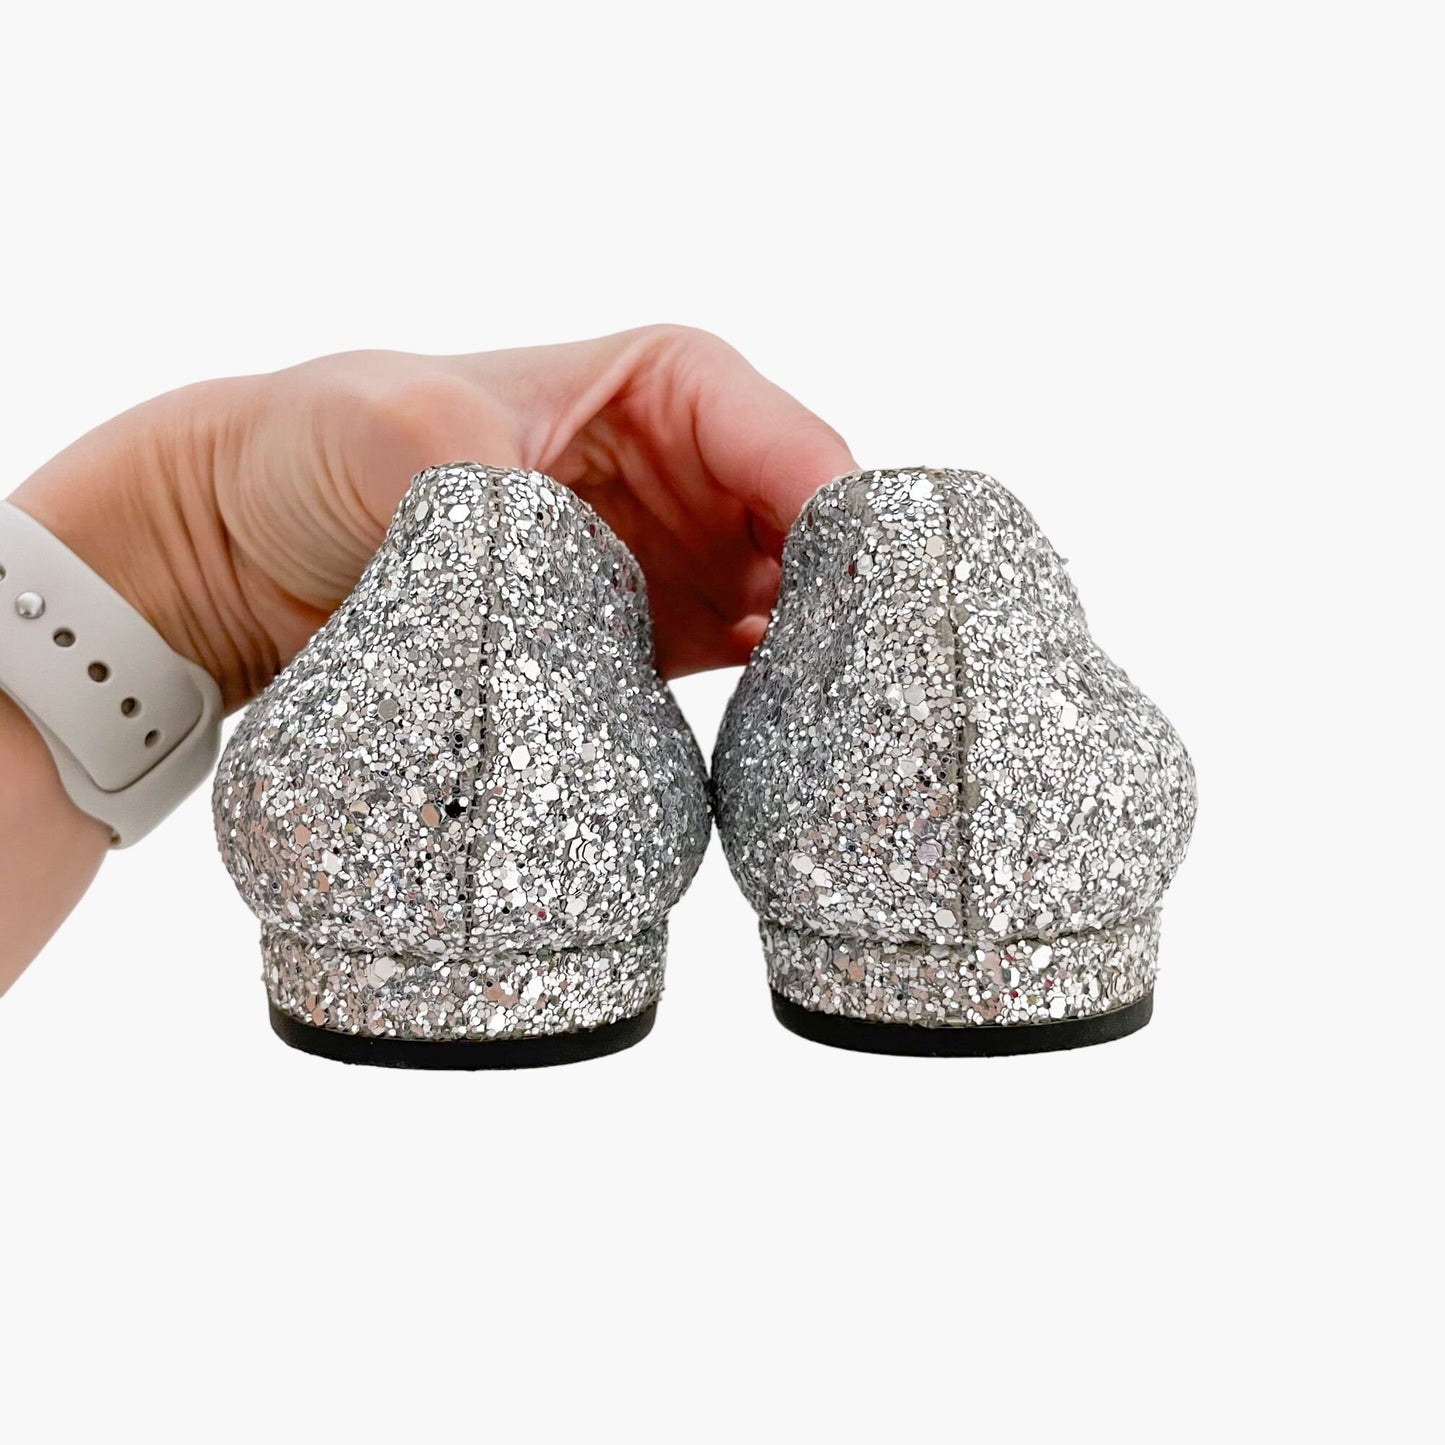 Chanel Glitter Camellia Crystal Flats in Silver Size 38